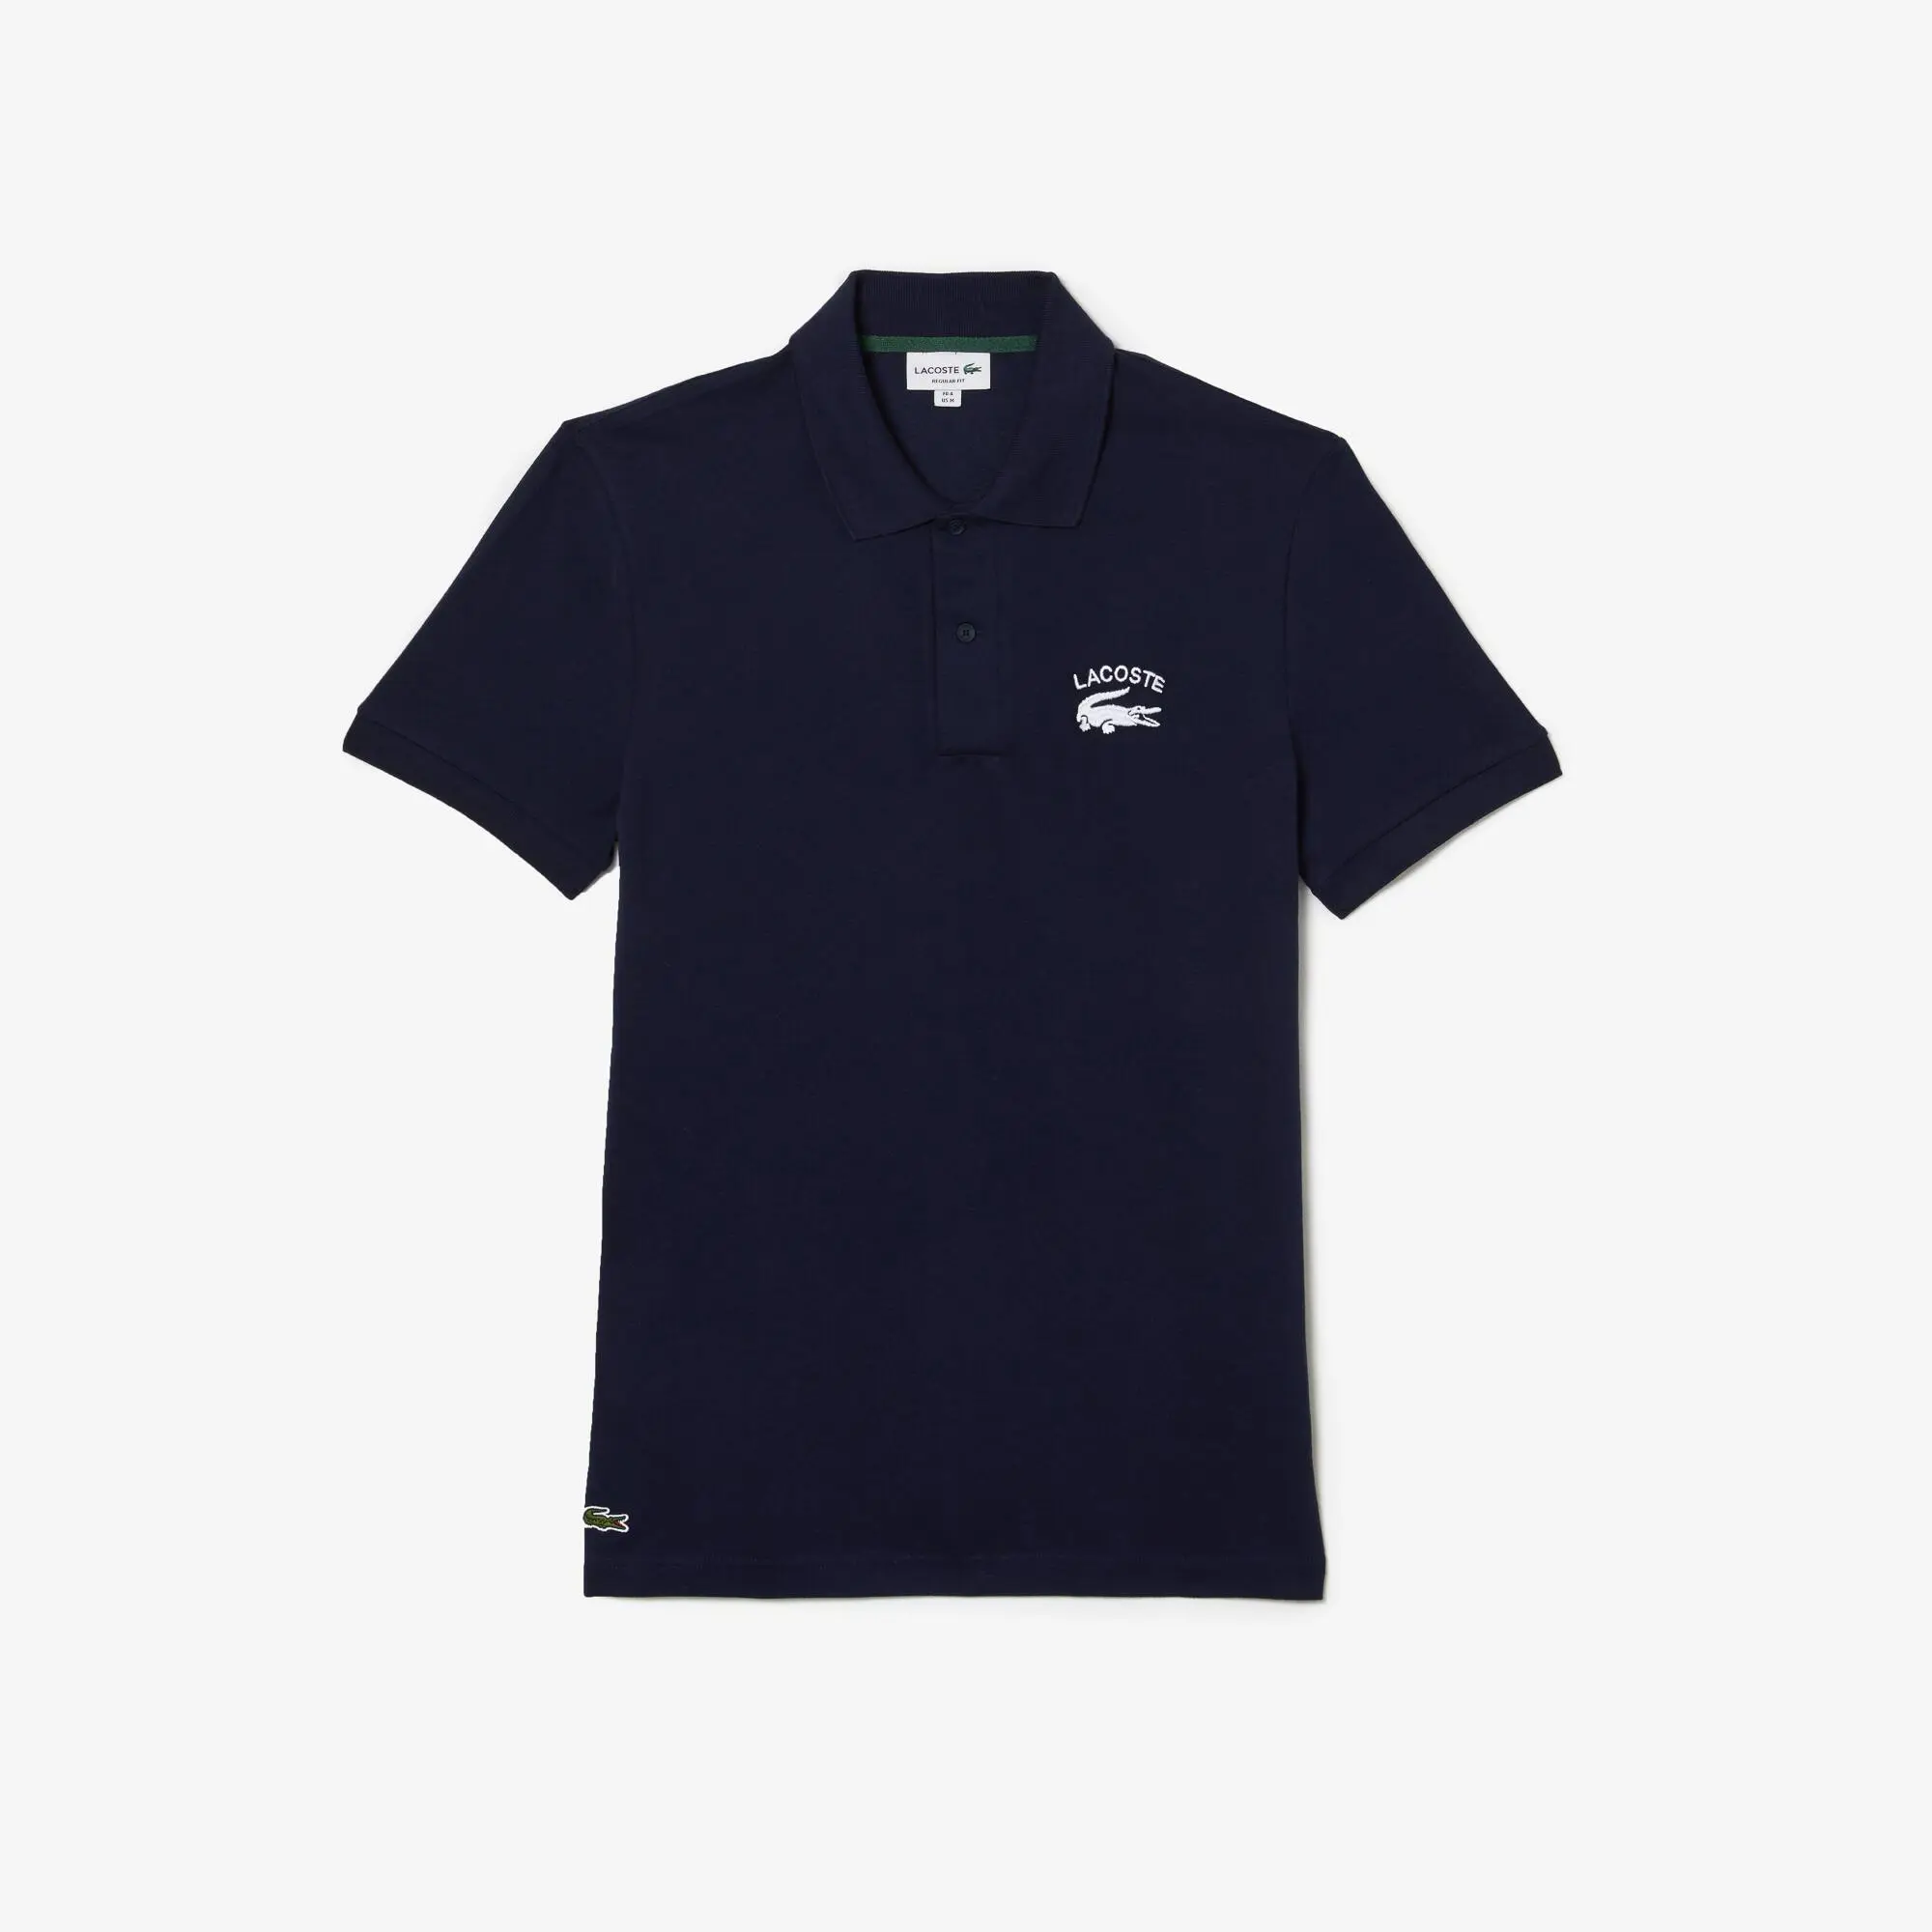 Lacoste Regular Fit Lacoste Branded Stretch Cotton Polo Shirt. 2